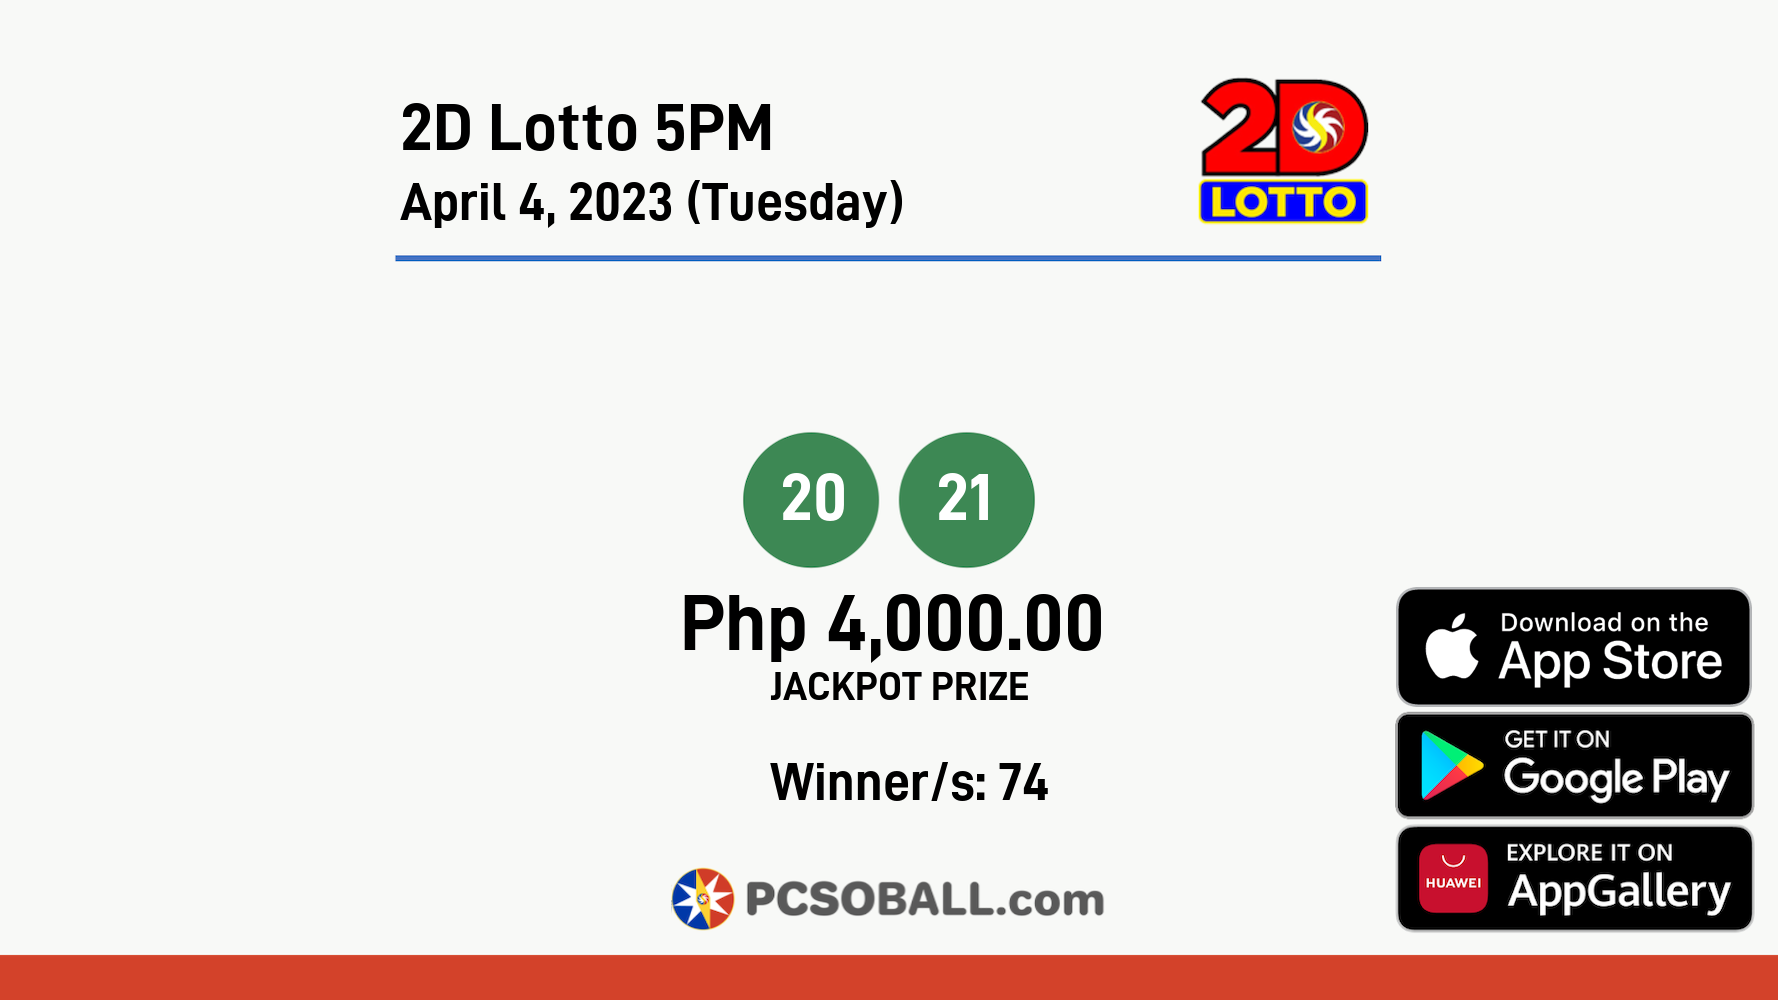 2D Lotto 5PM April 4, 2023 (Tuesday) Result